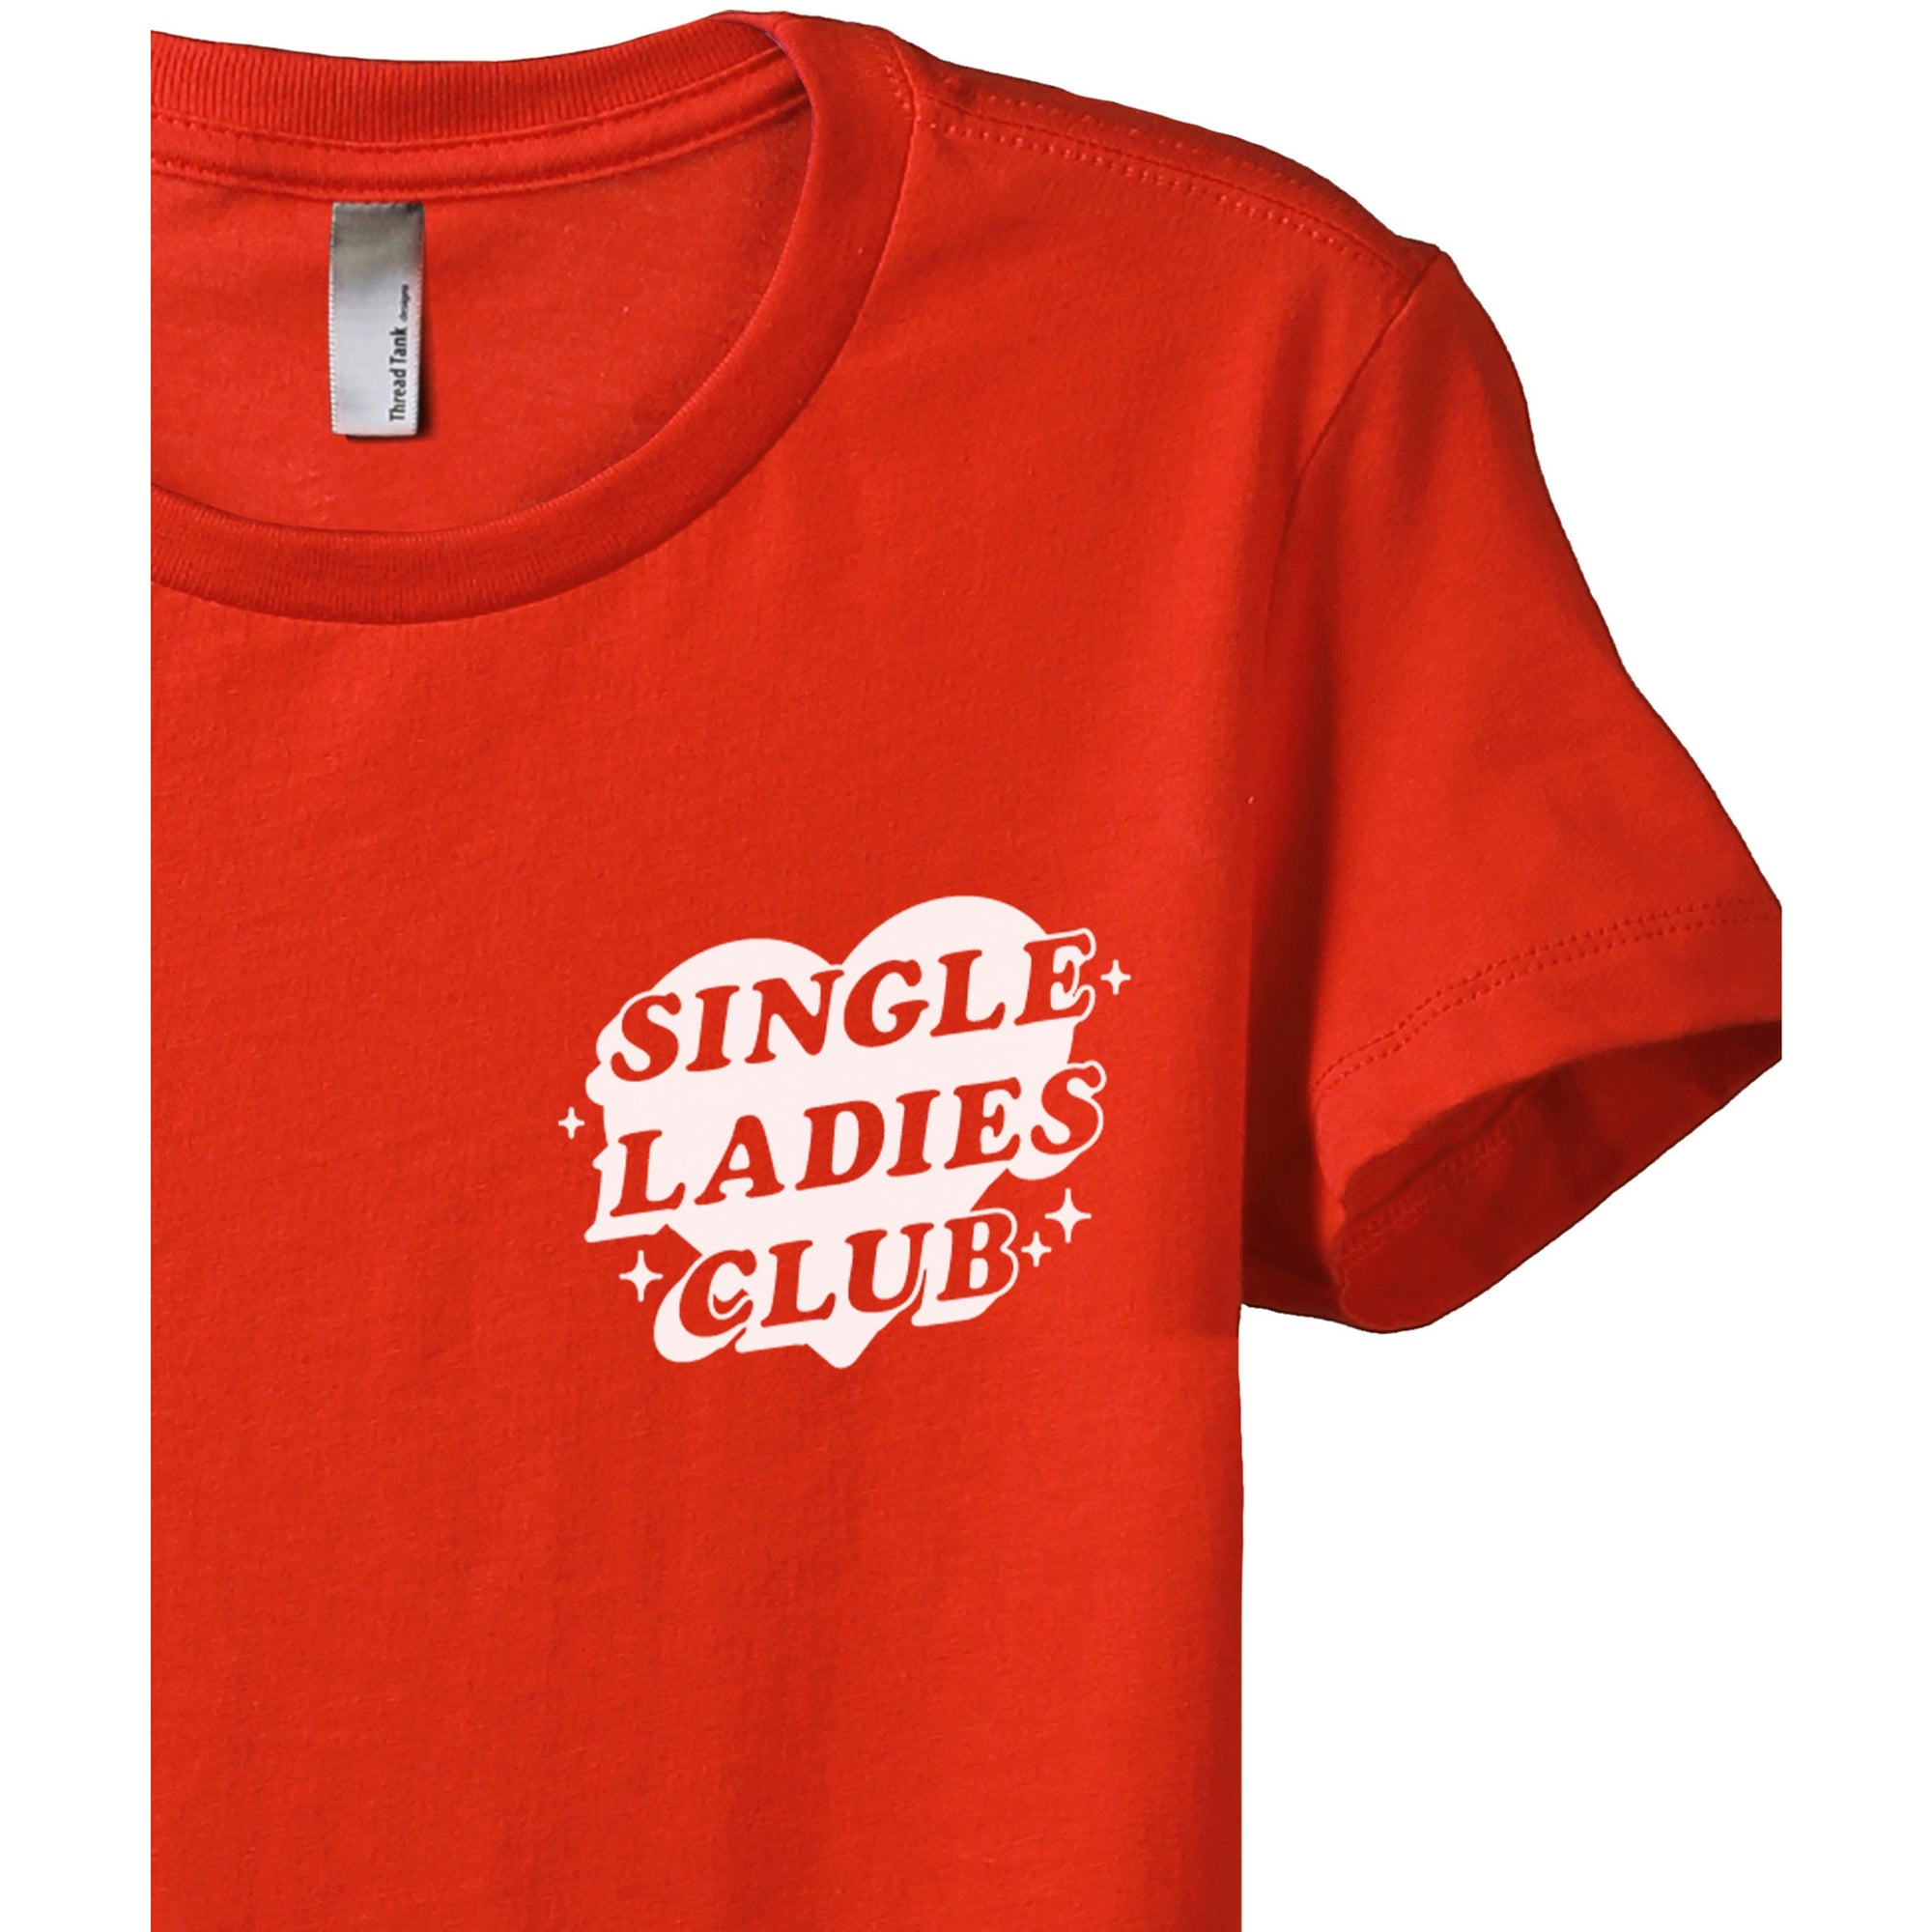 Single Ladies Club - Stories You Can Wear